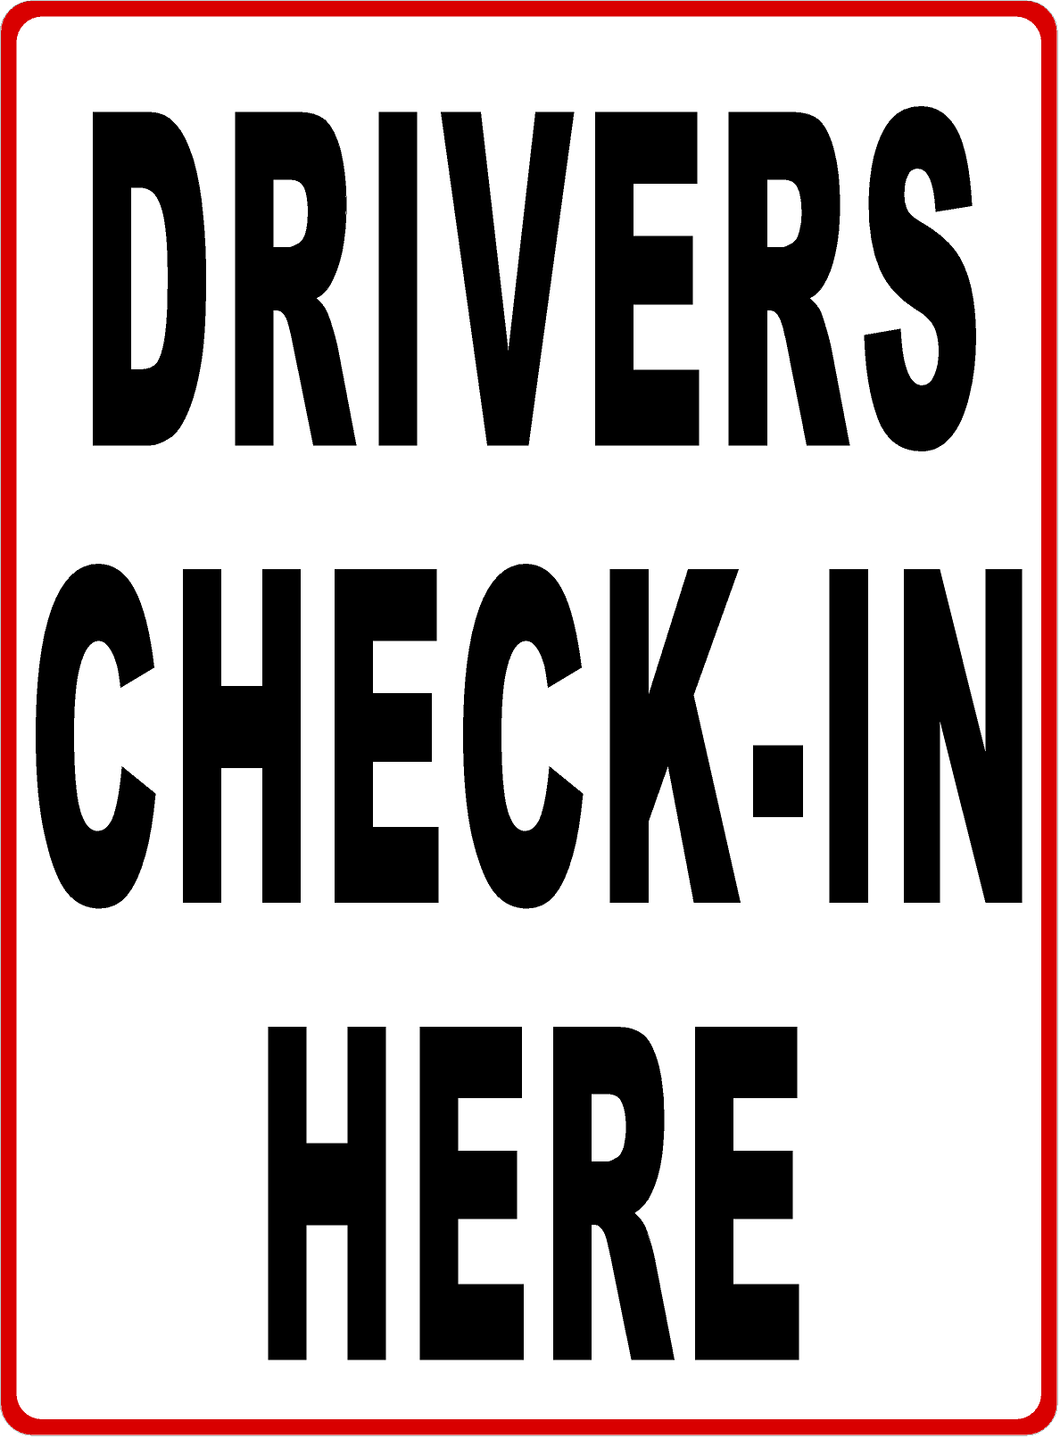 Driver Check in Sign